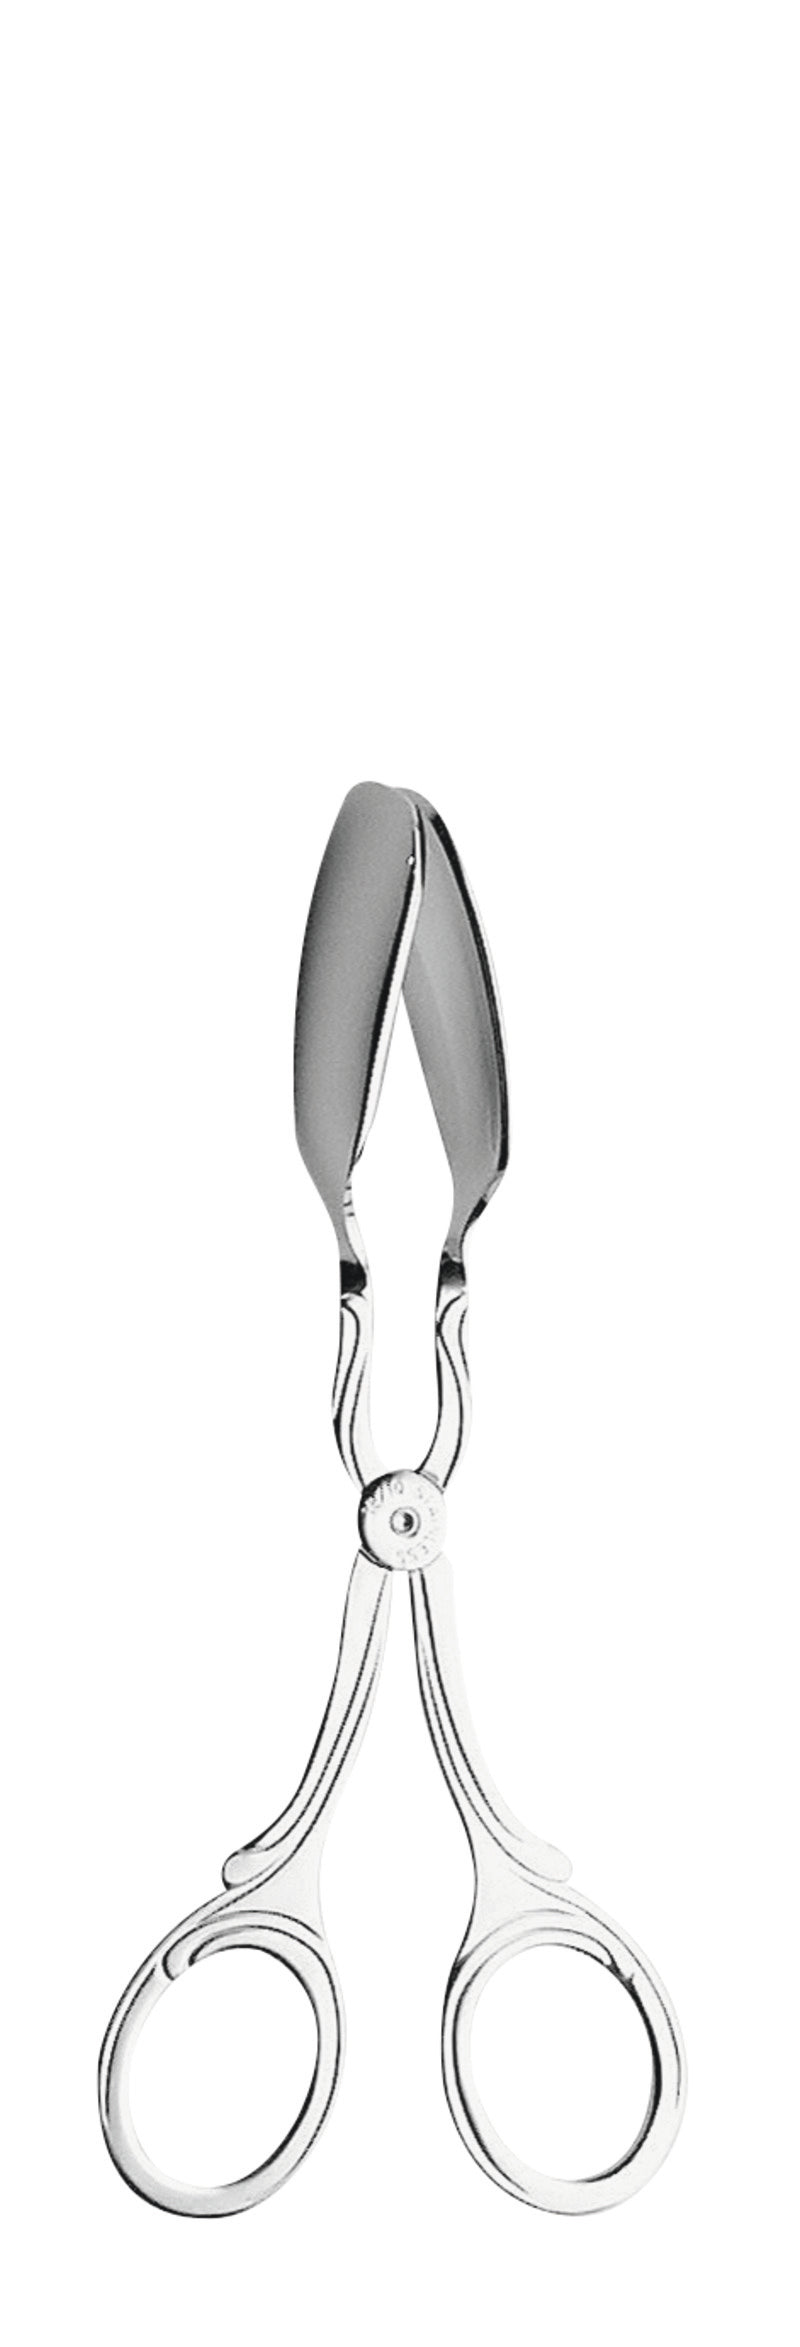 Pastry Tongs 6.9